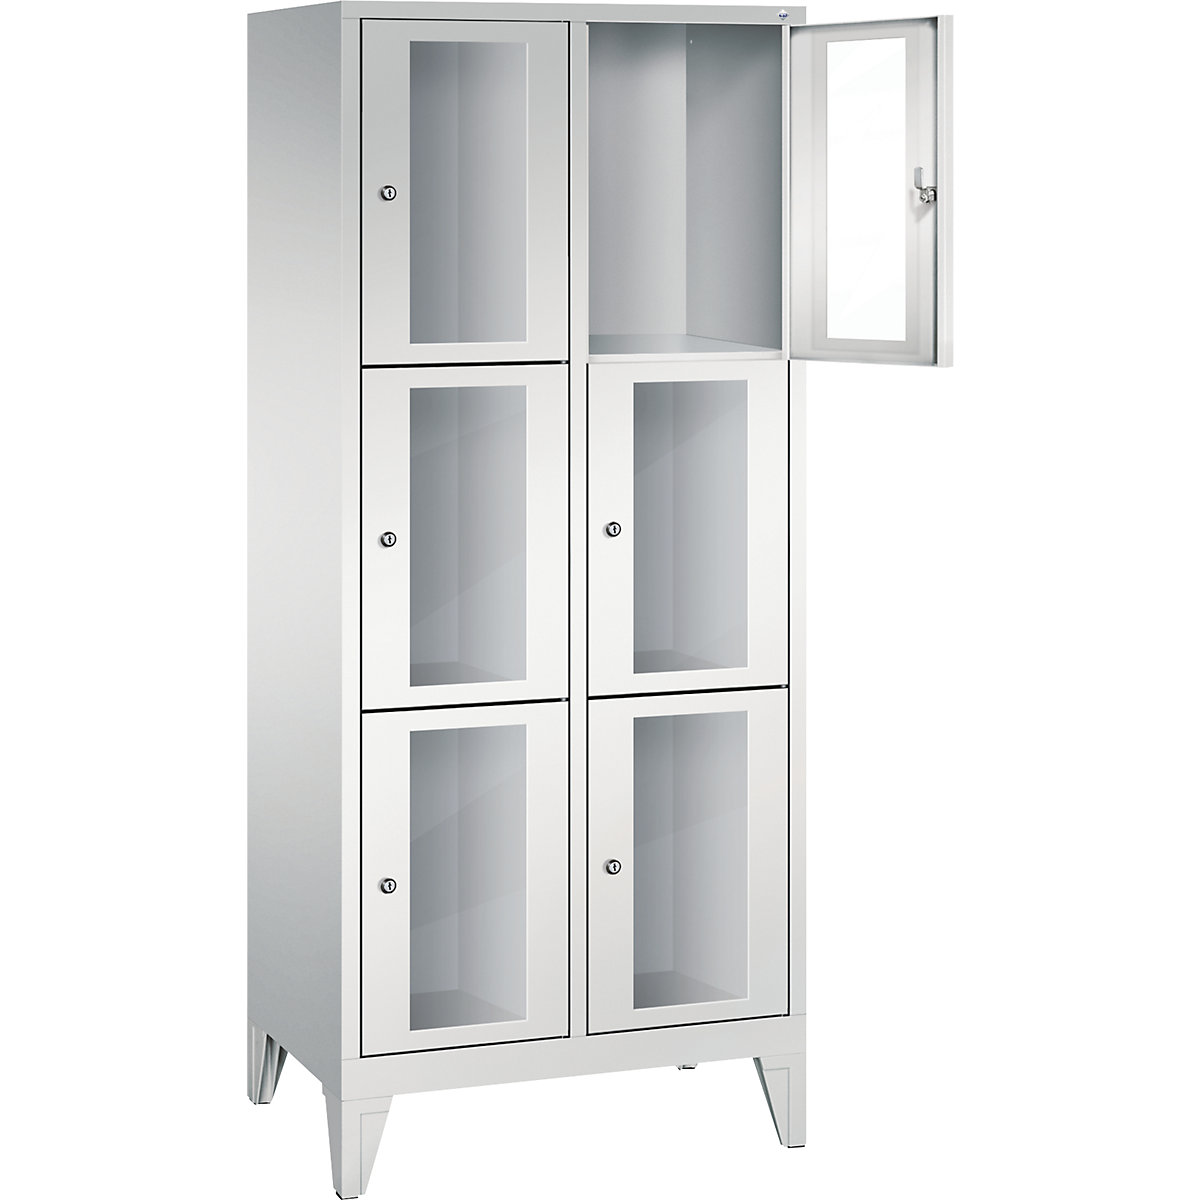 C+P – CLASSIC locker unit, compartment height 510 mm, with feet, 6 compartments, width 810 mm, light grey door